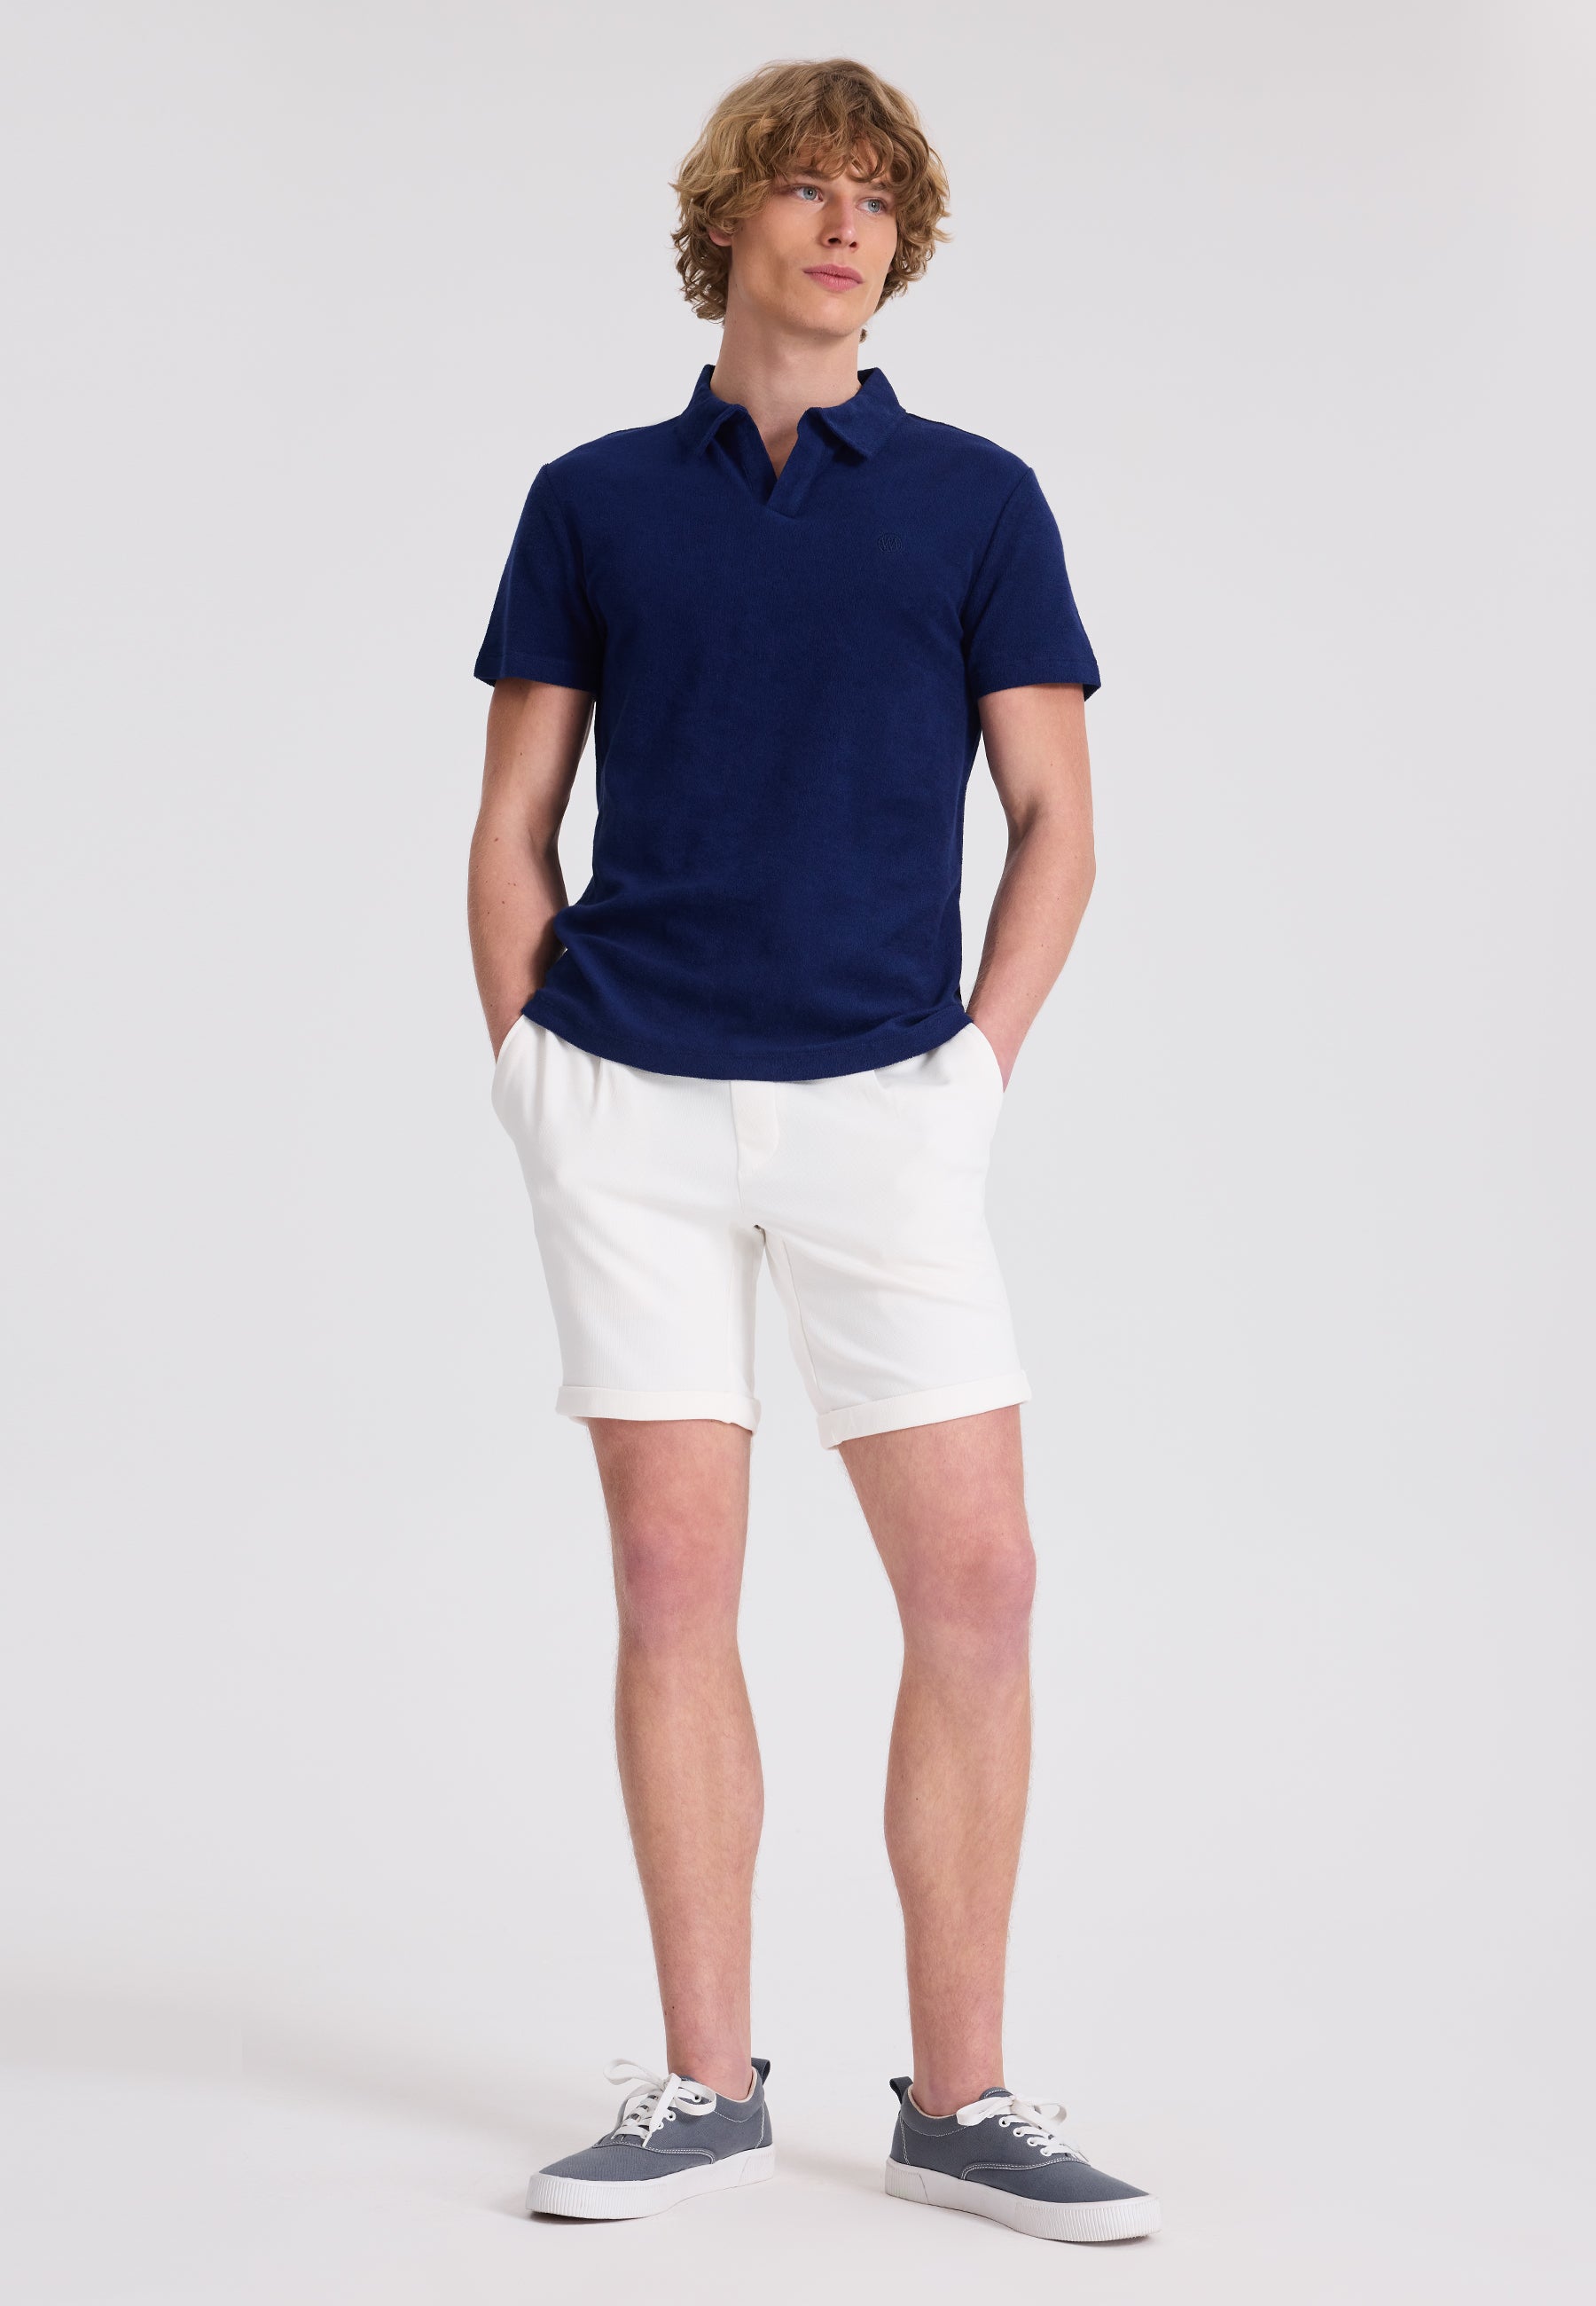 BREEZE TOWELLING POLO SHIRT in Naval Academy